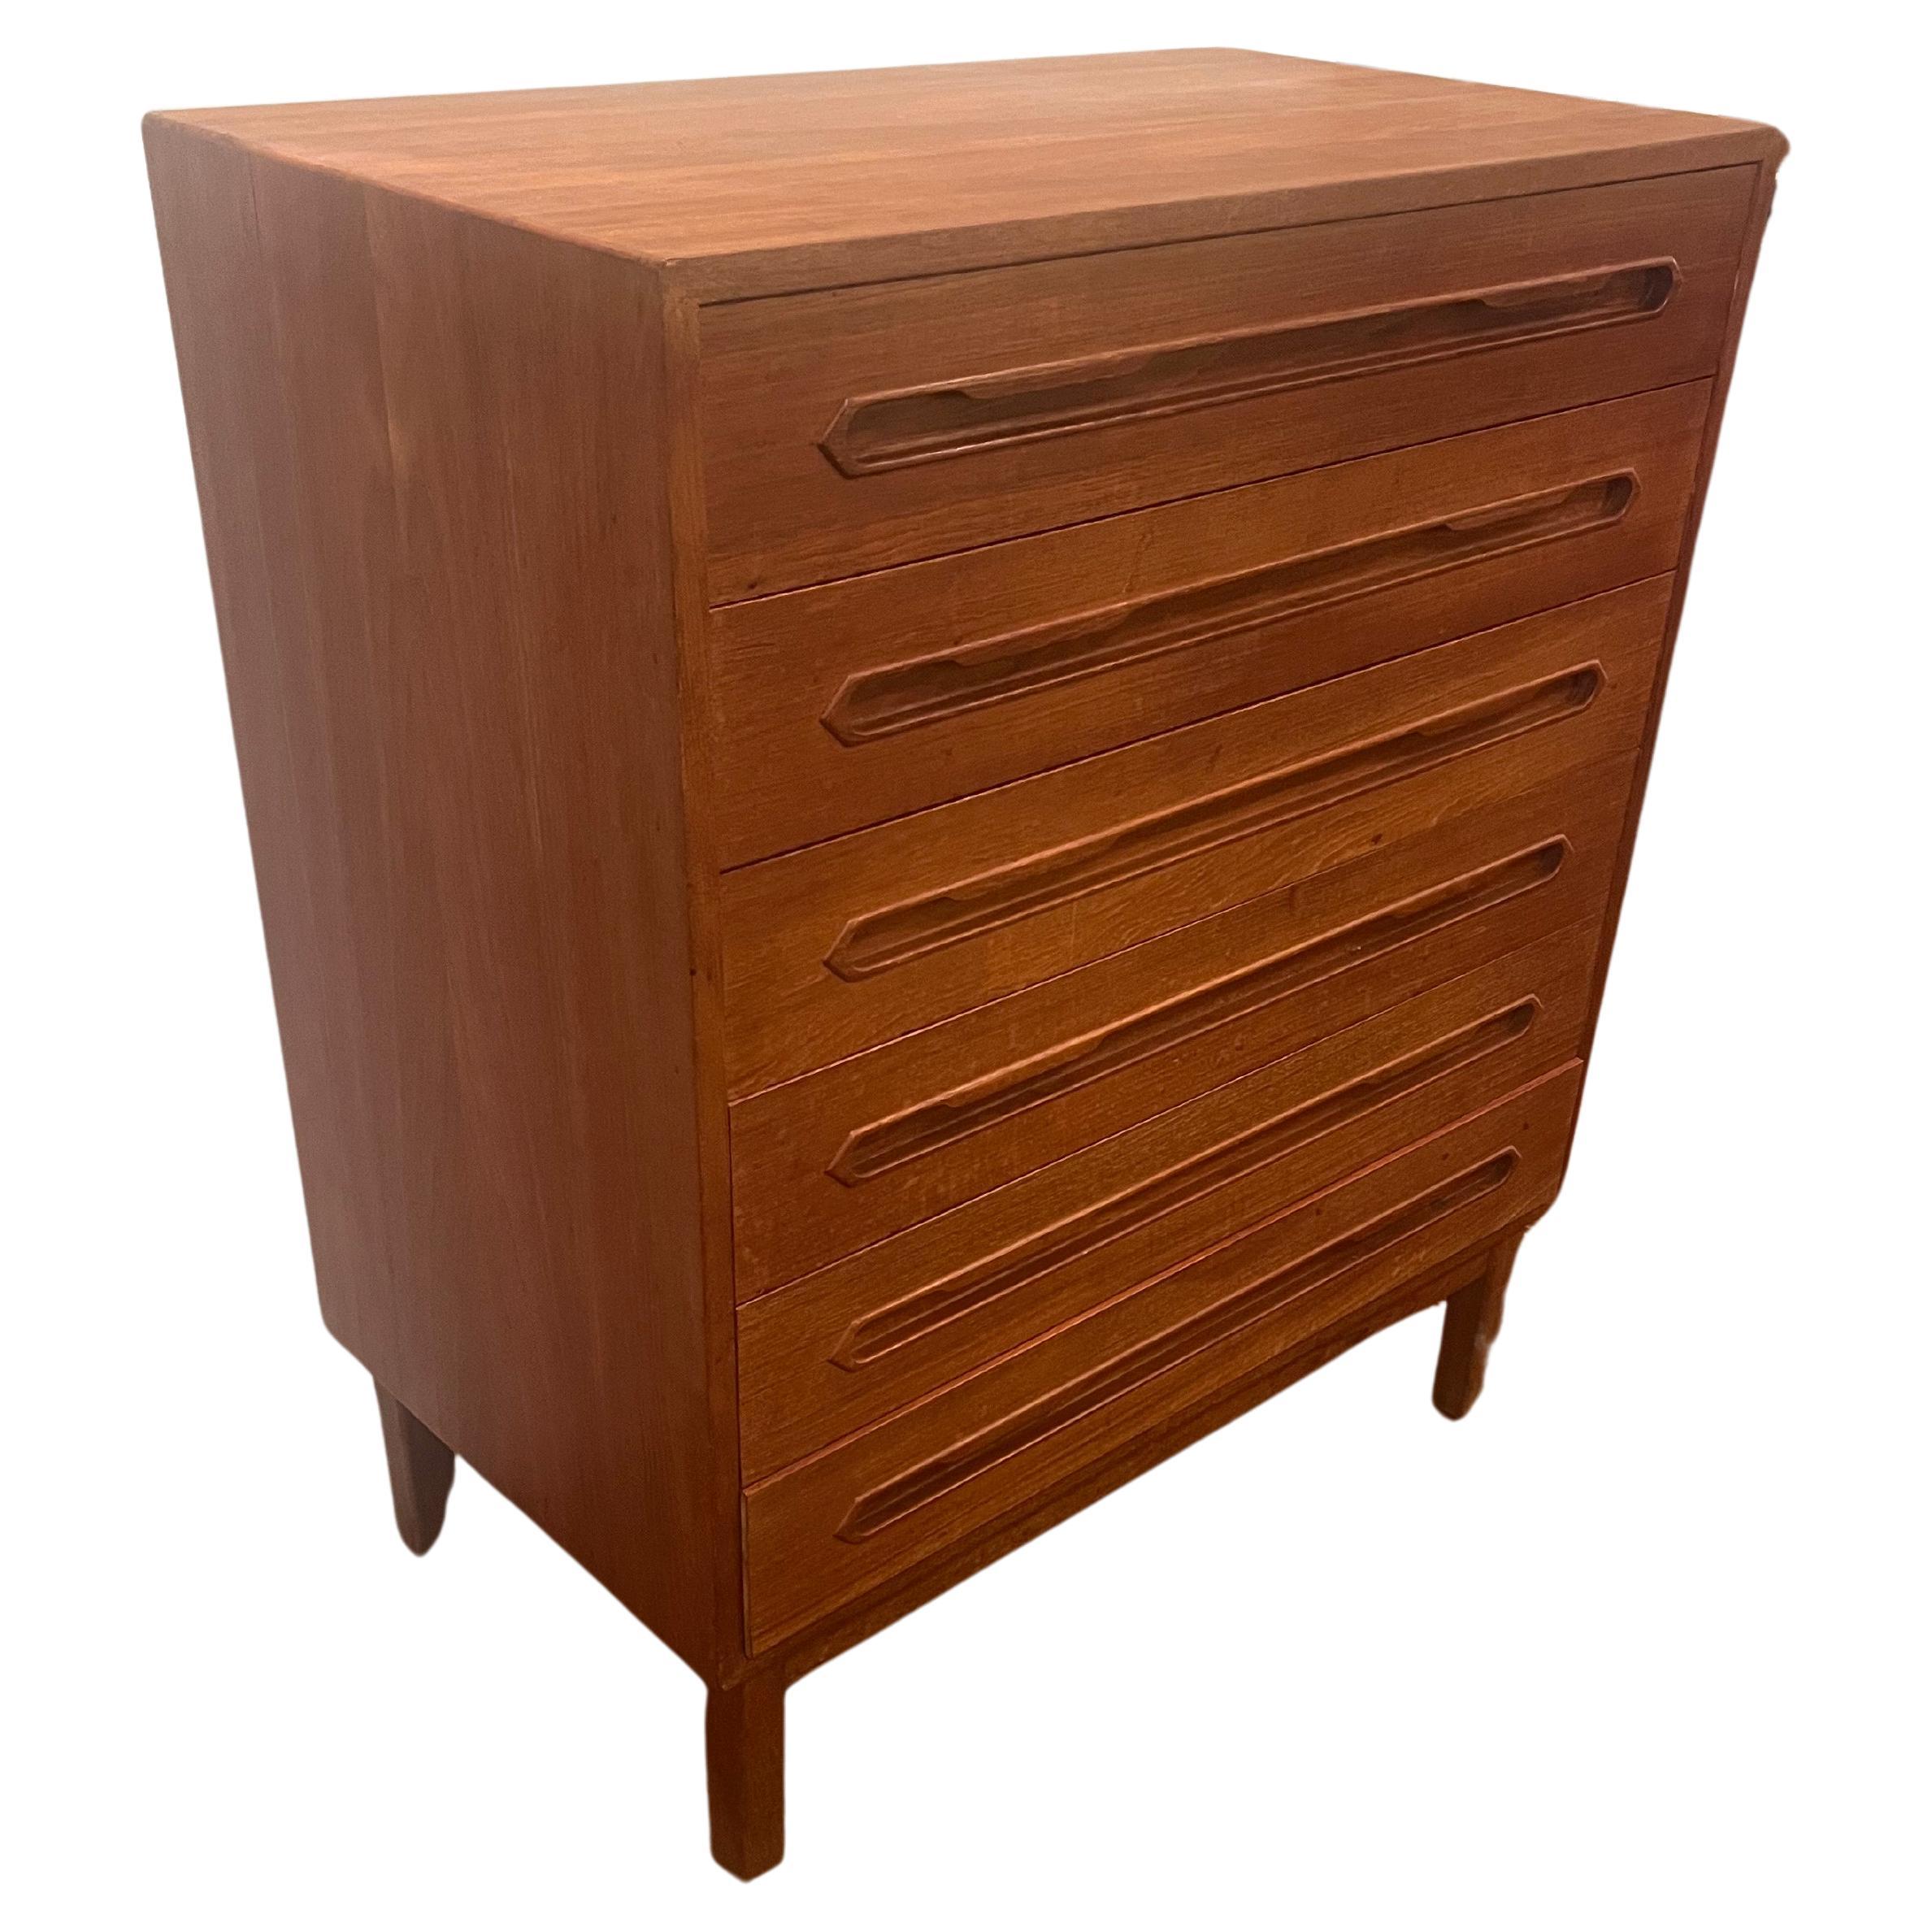 Danish Modern Teak Tall Dresser Chest of Six Drawers In Good Condition For Sale In San Diego, CA